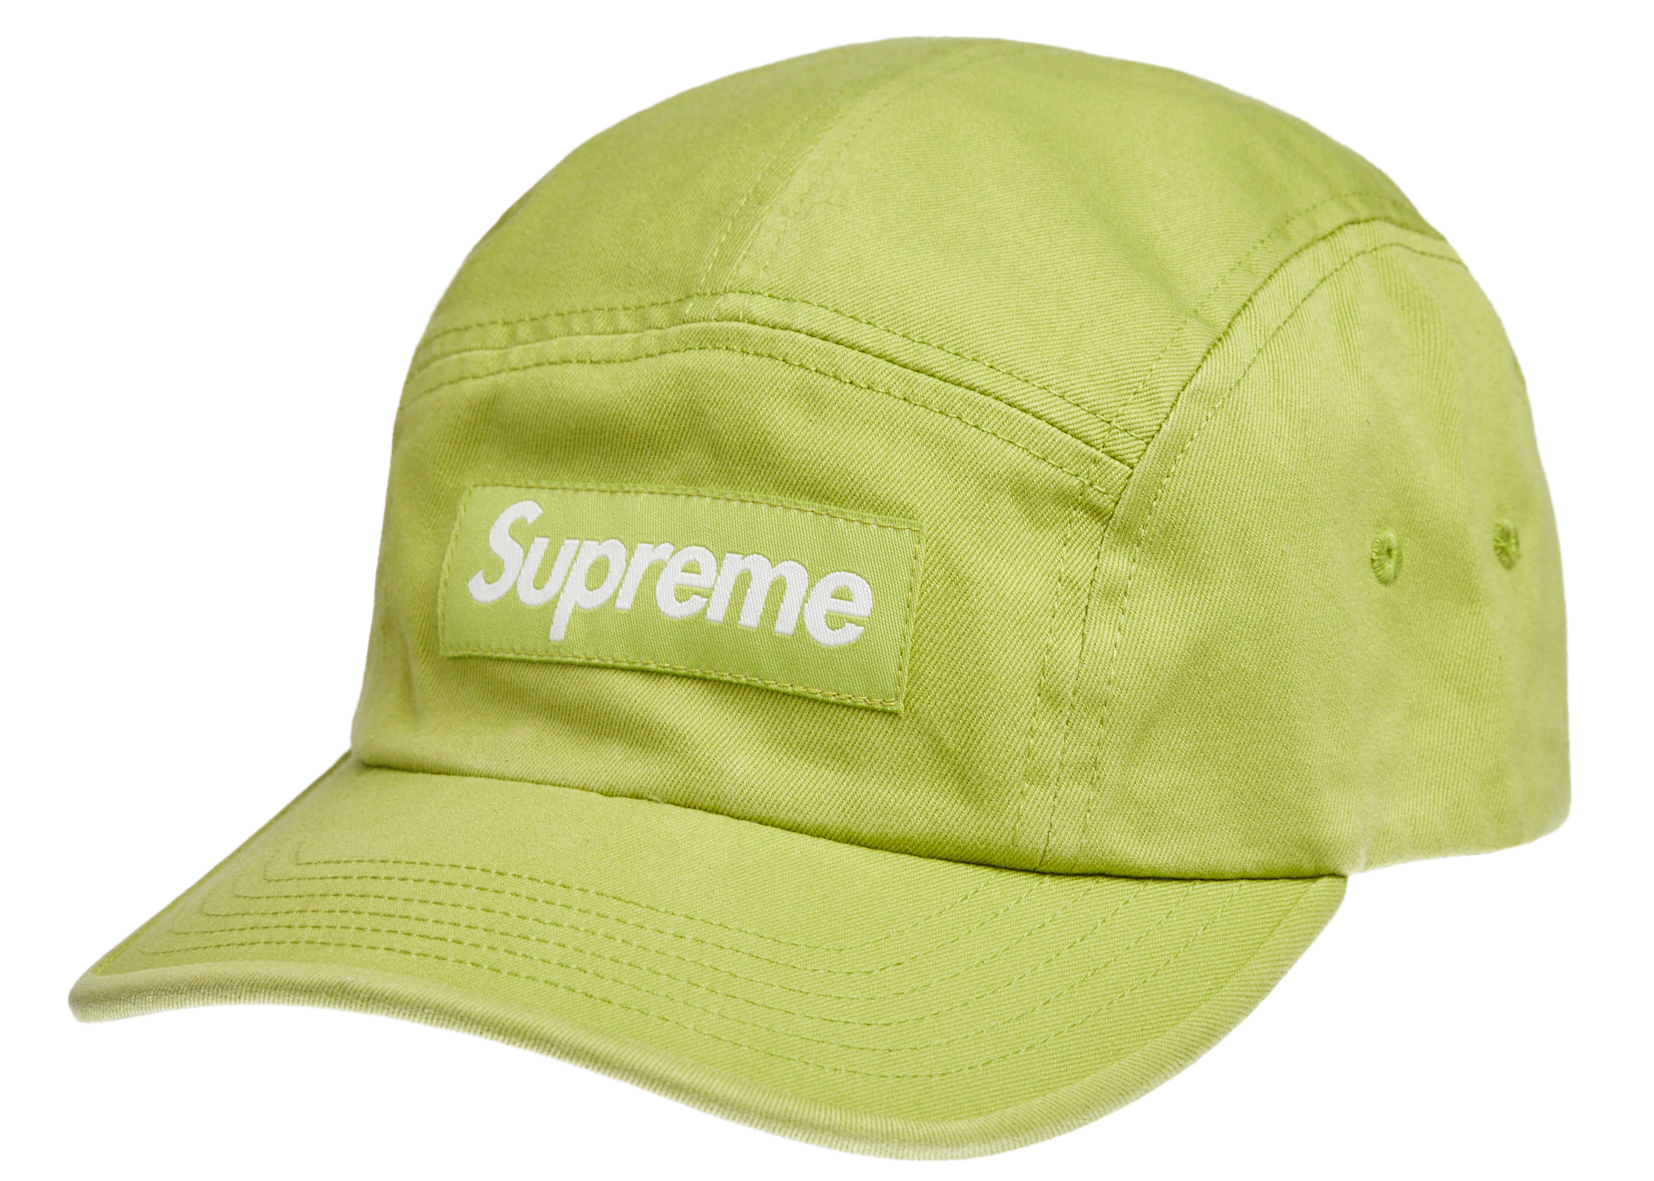 Supreme Washed Chino Twill Camp Cap Cap (SS22) Black - SS22 - US